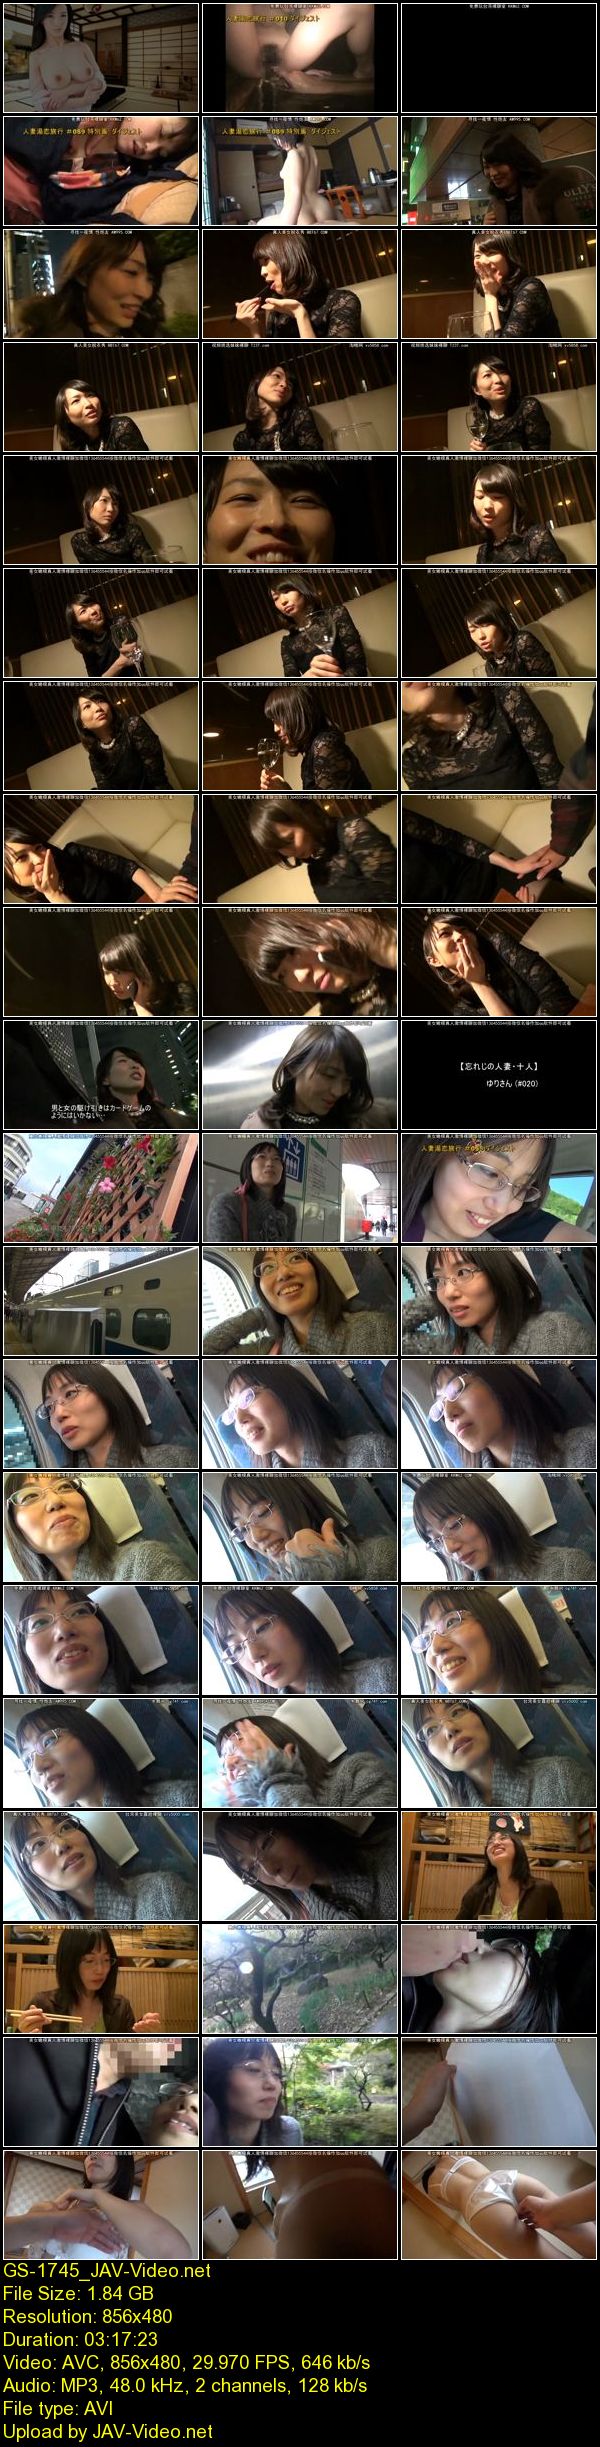 Download Japanese Adult Video Amateur [GS 1745] 人妻湯恋旅行 100anniversary 前篇 熟女 ゴーゴーズ Mature 着物巨乳 人妻・熟女 不倫 2017 01 13